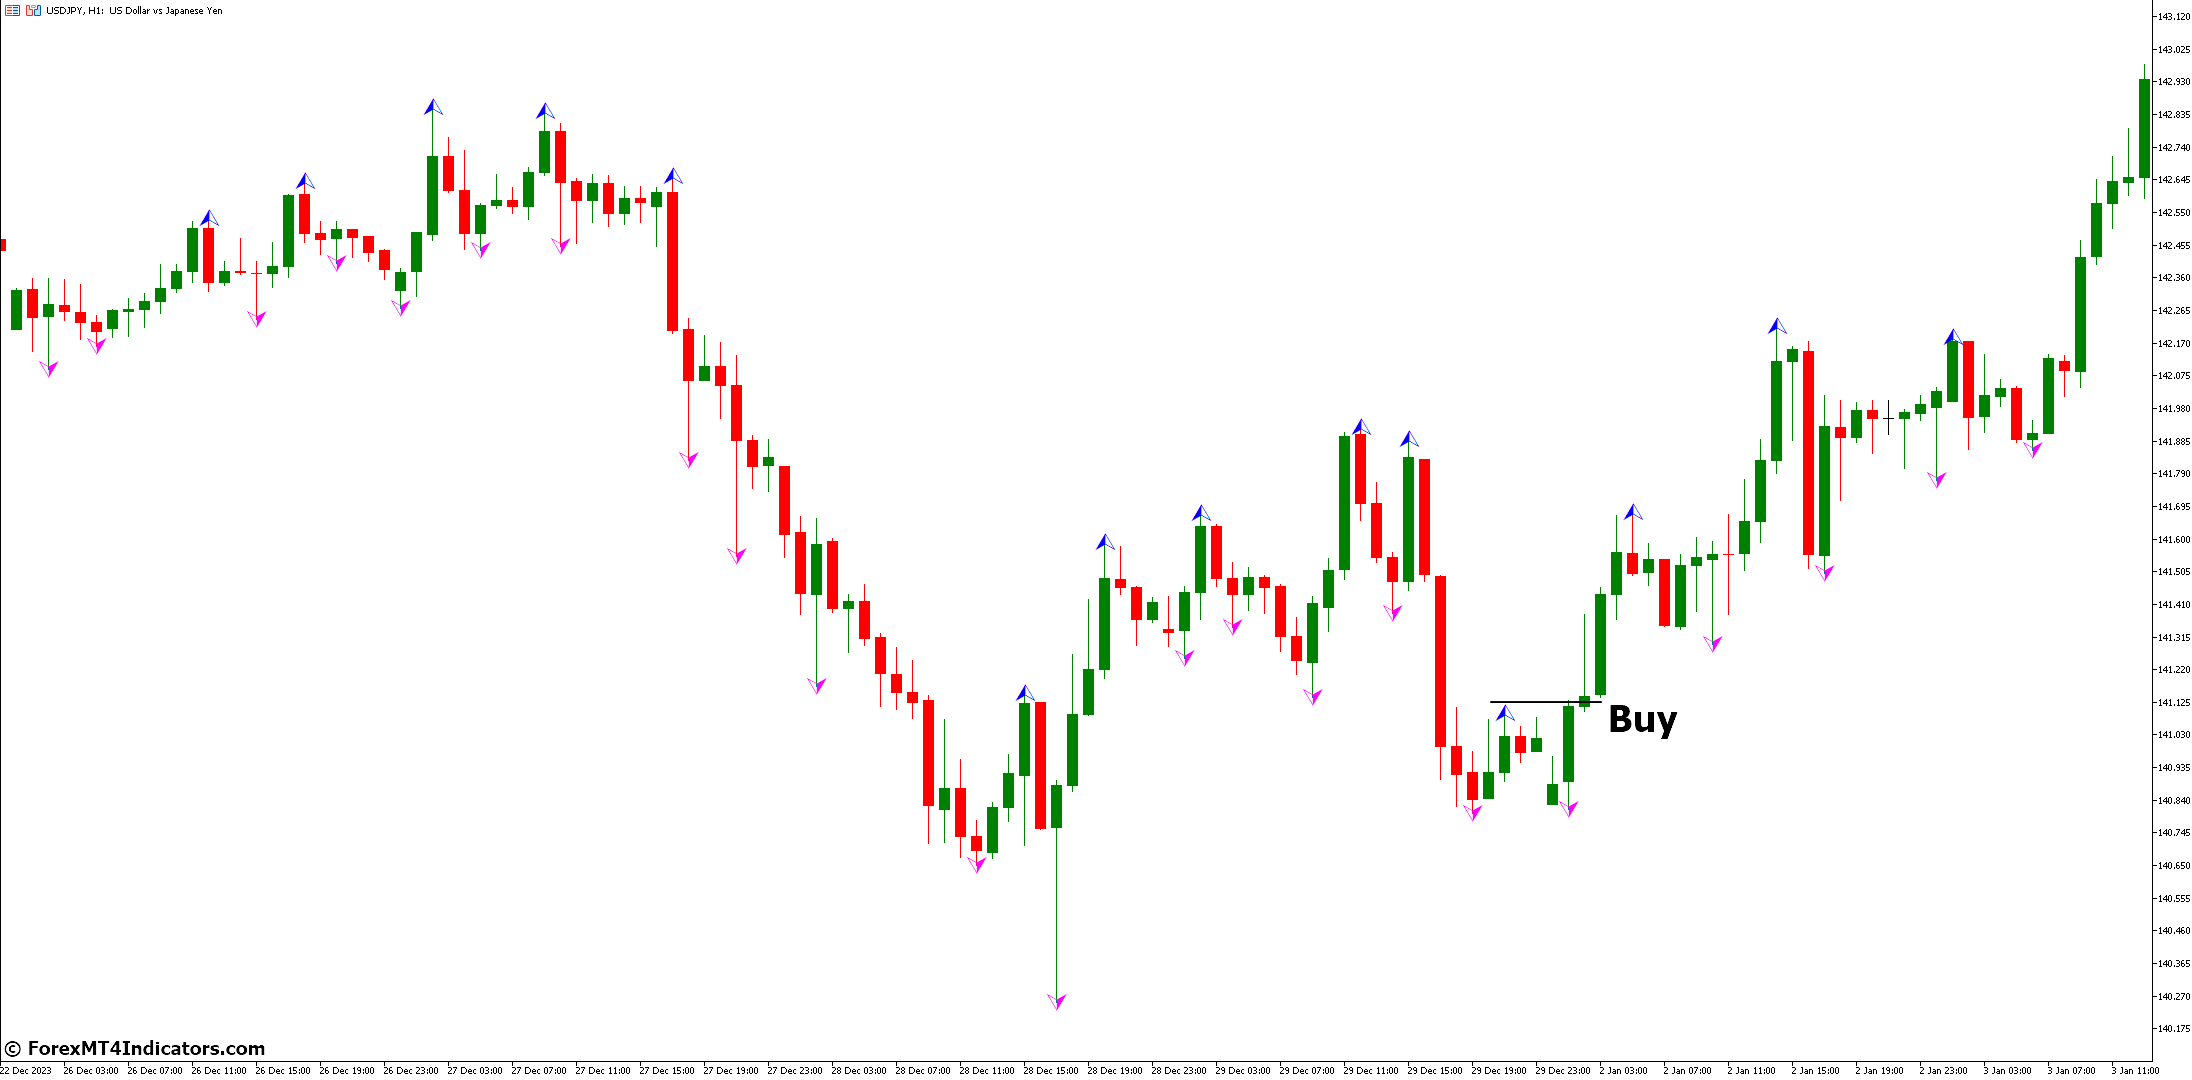 How to Trade with WLX Fractals Indicator - Buy Entry